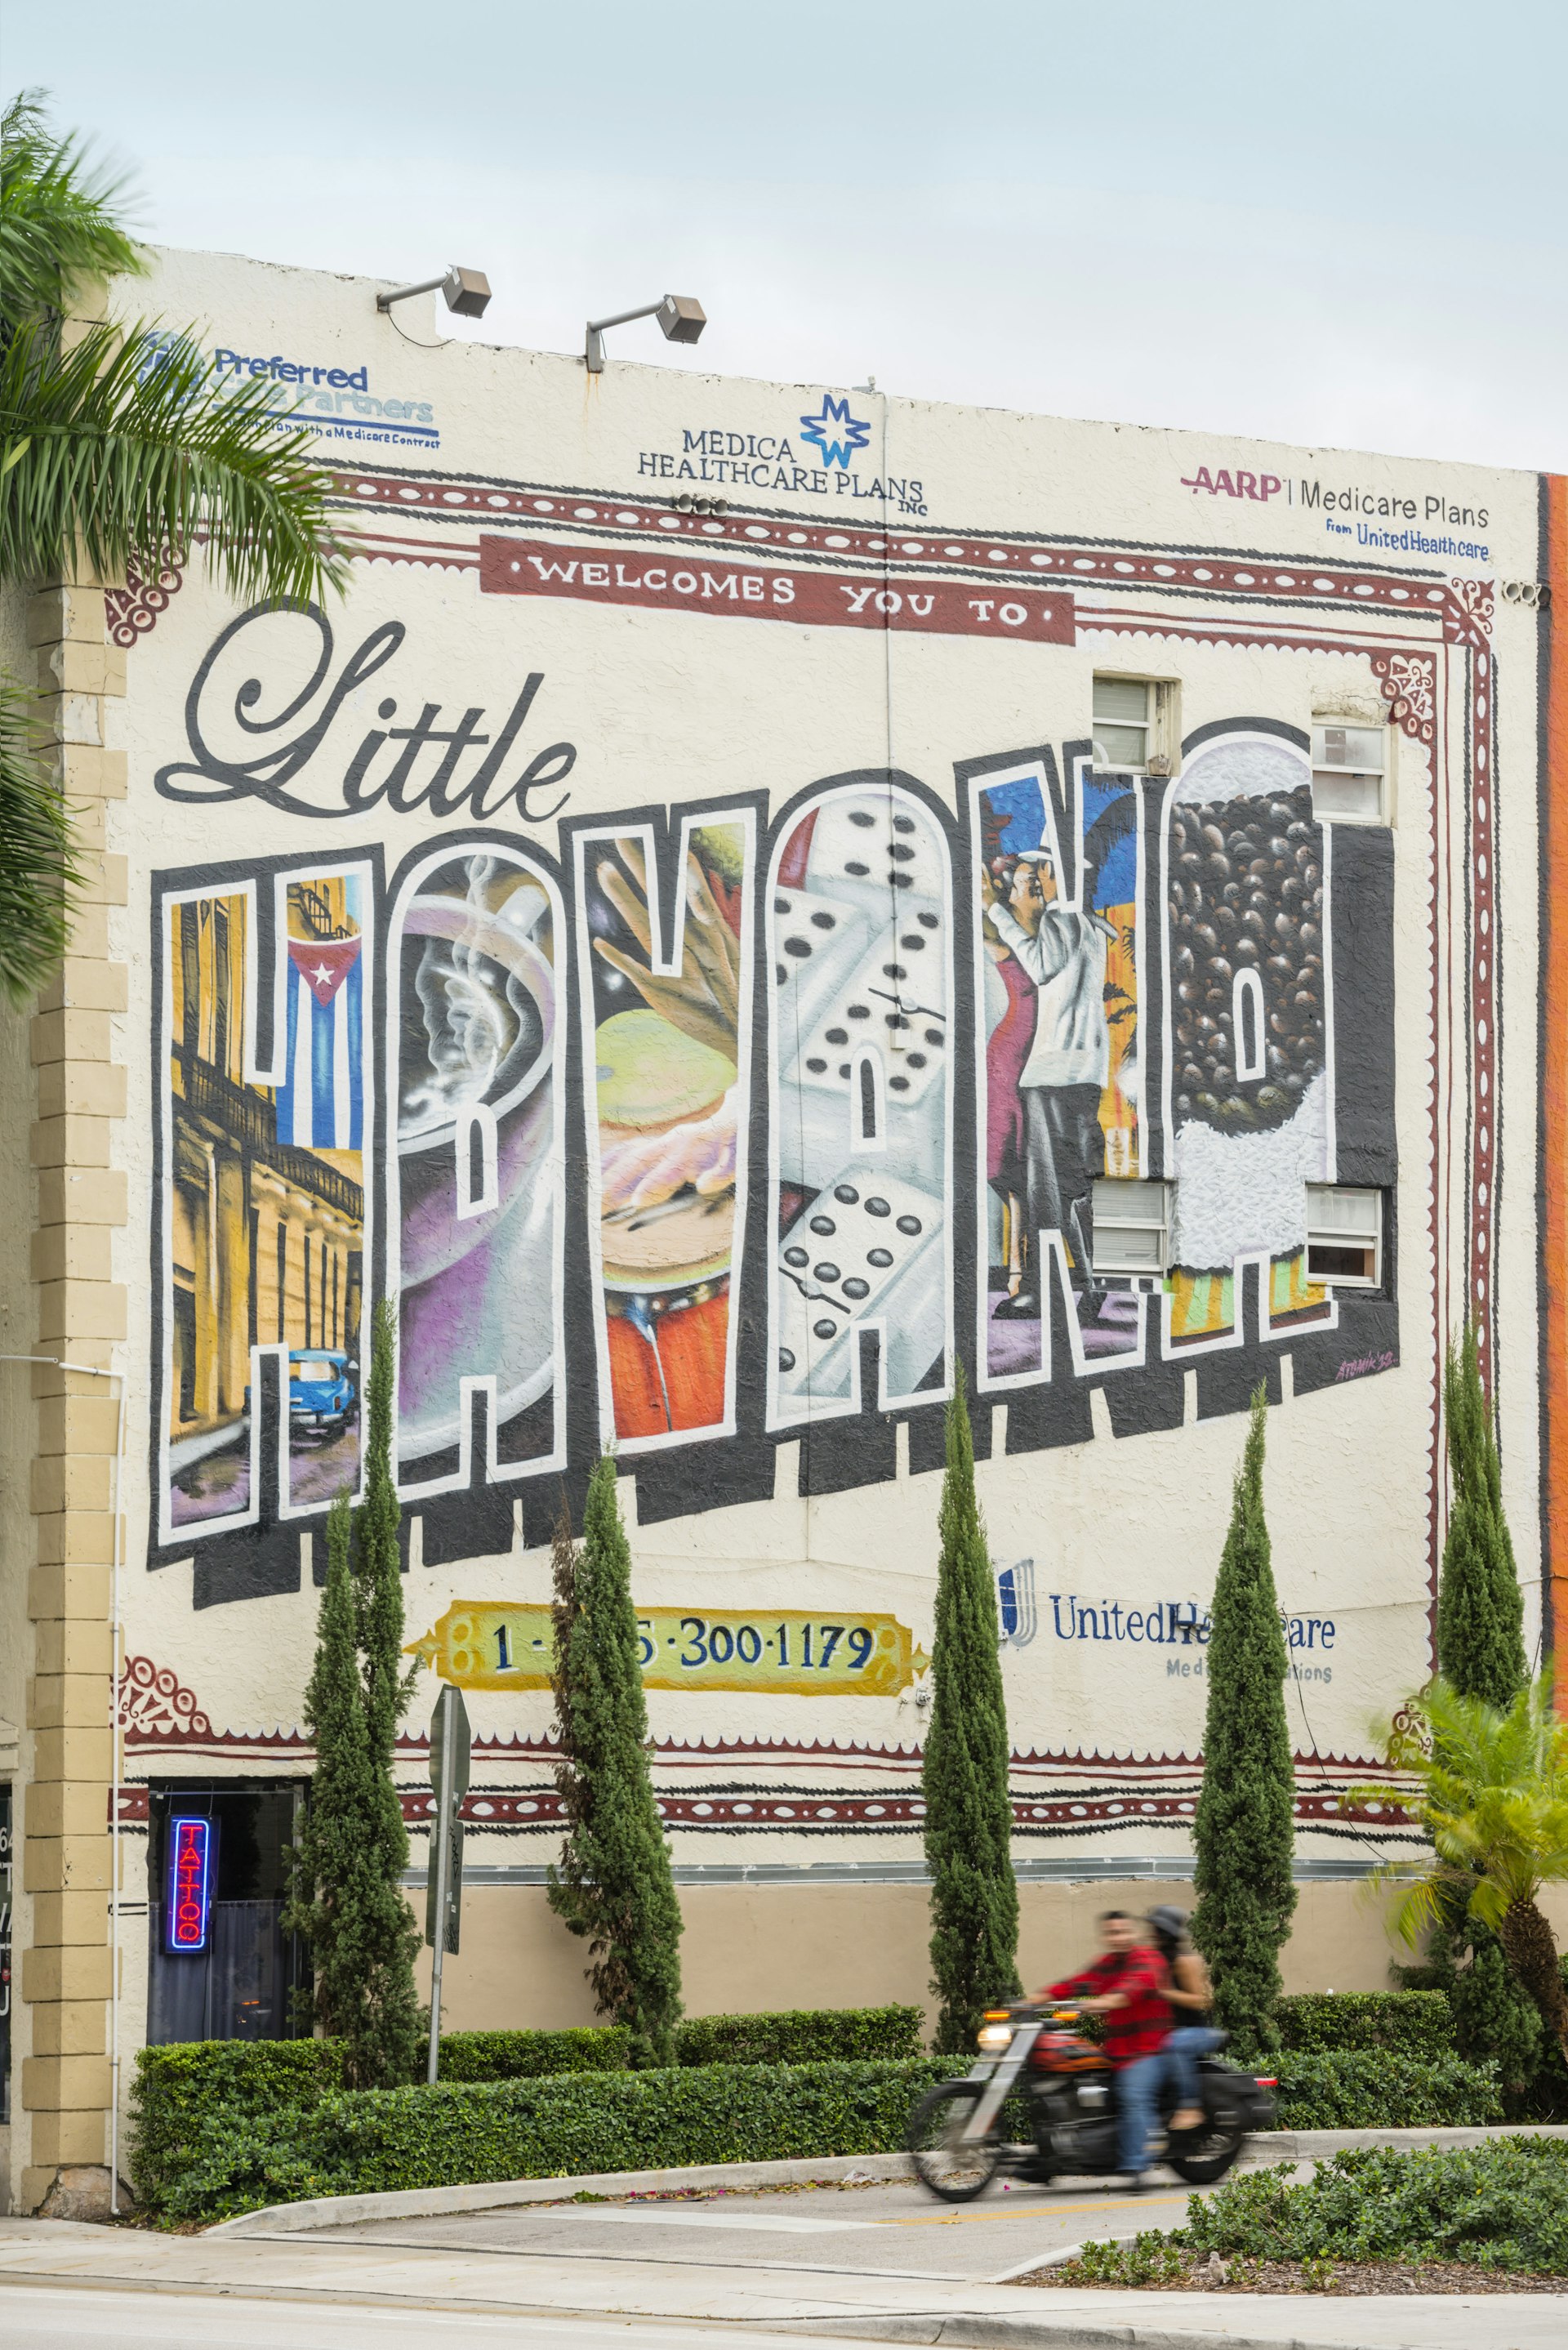 A wall mural welcomes visitors to Little Havana, Miami, Florida.